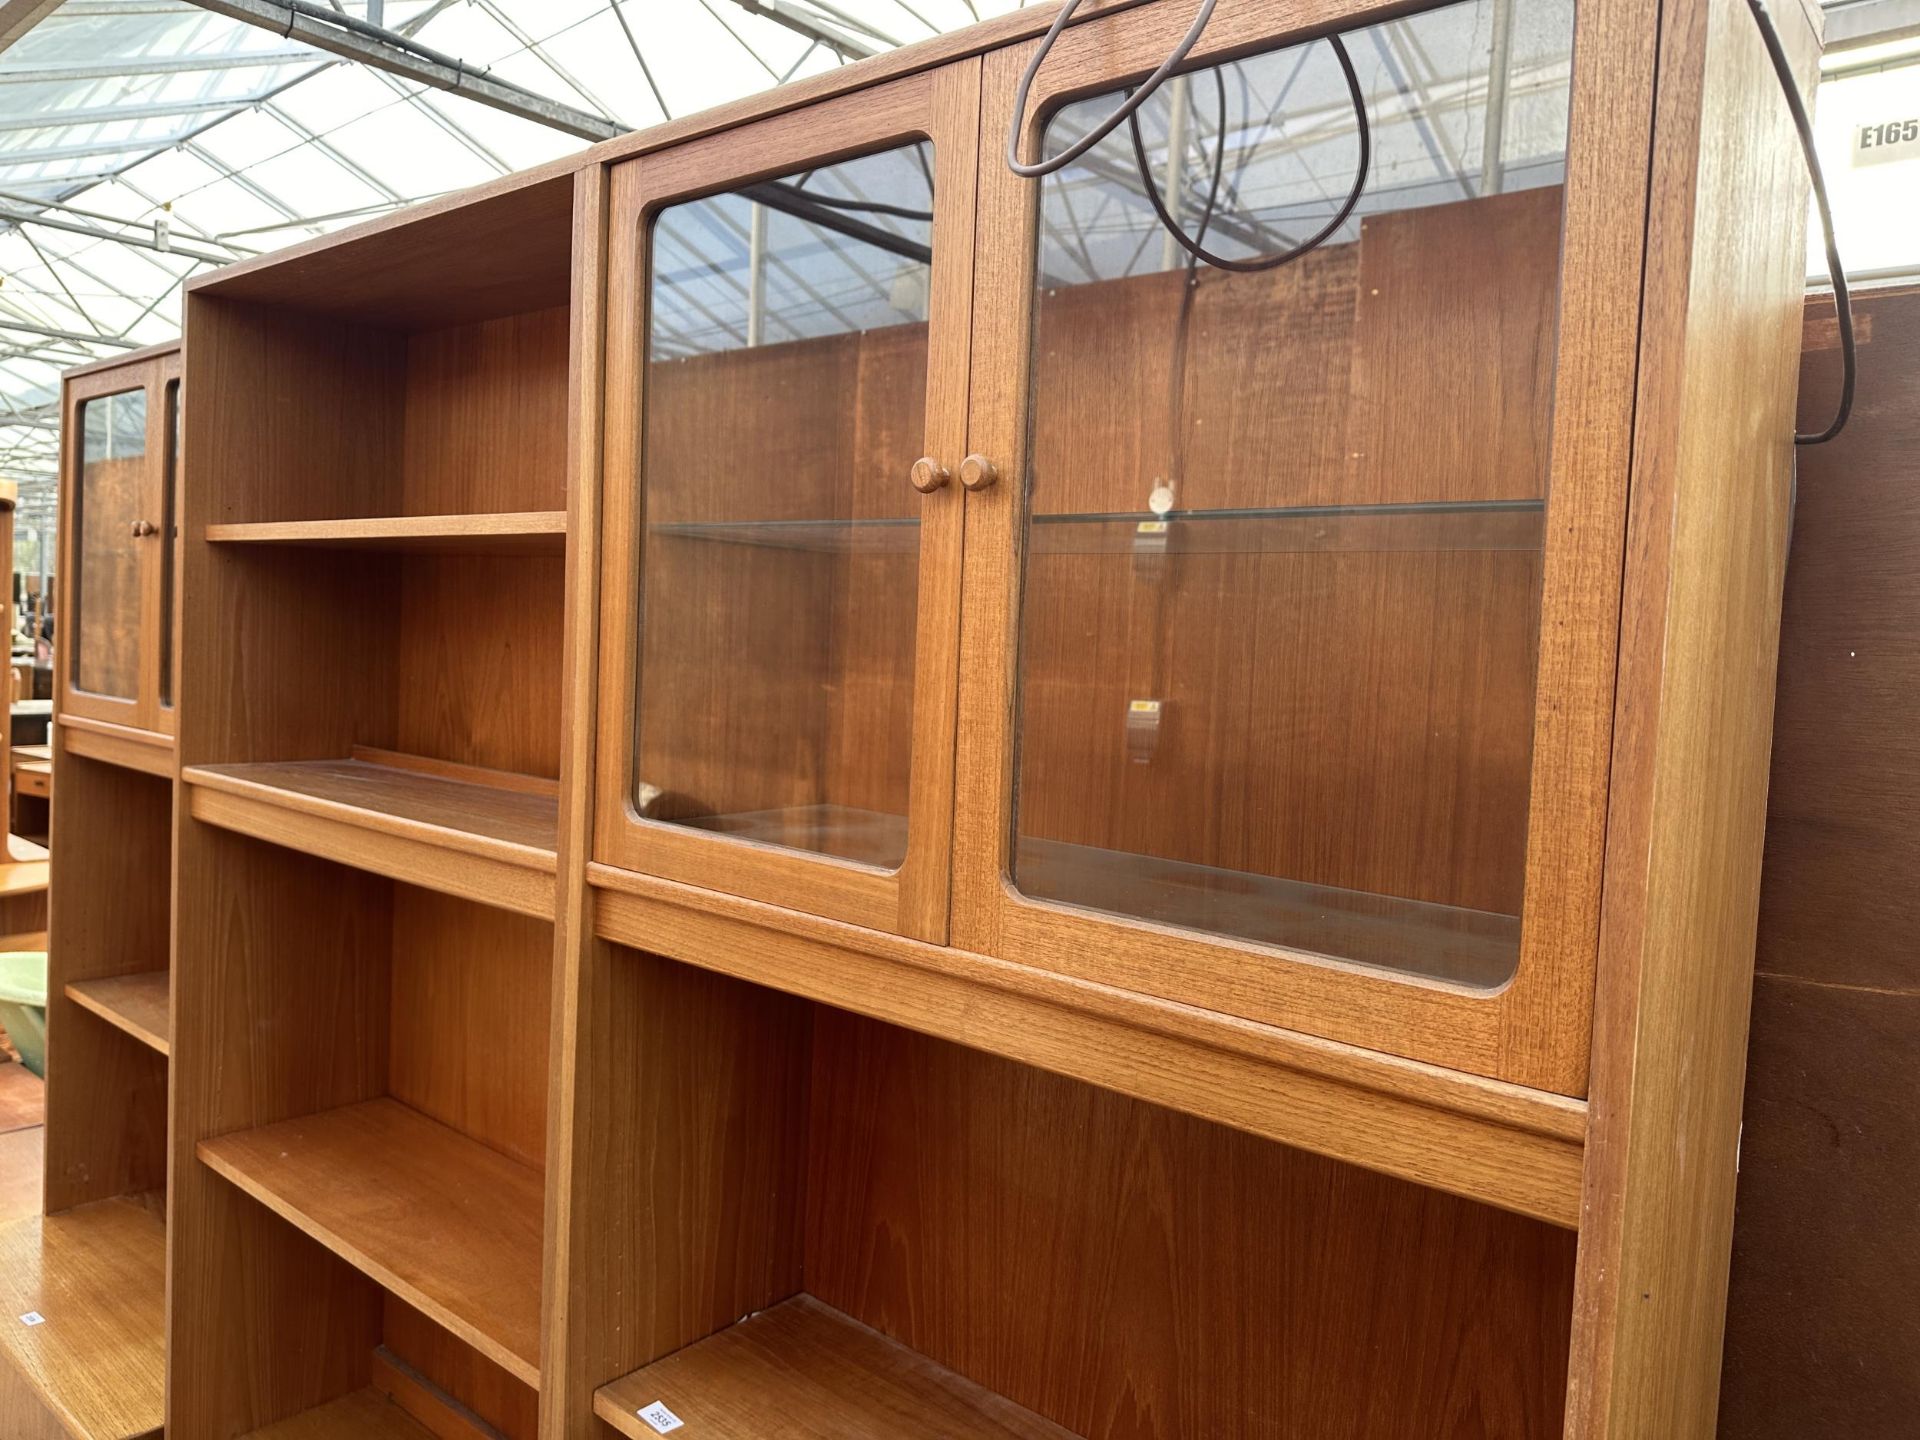 A G PLAN RETRO TEAK UNIT WITH TWO GLAZED UPPER DOORS AND DRAWERS TO BASE 64" WIDE - Image 2 of 6